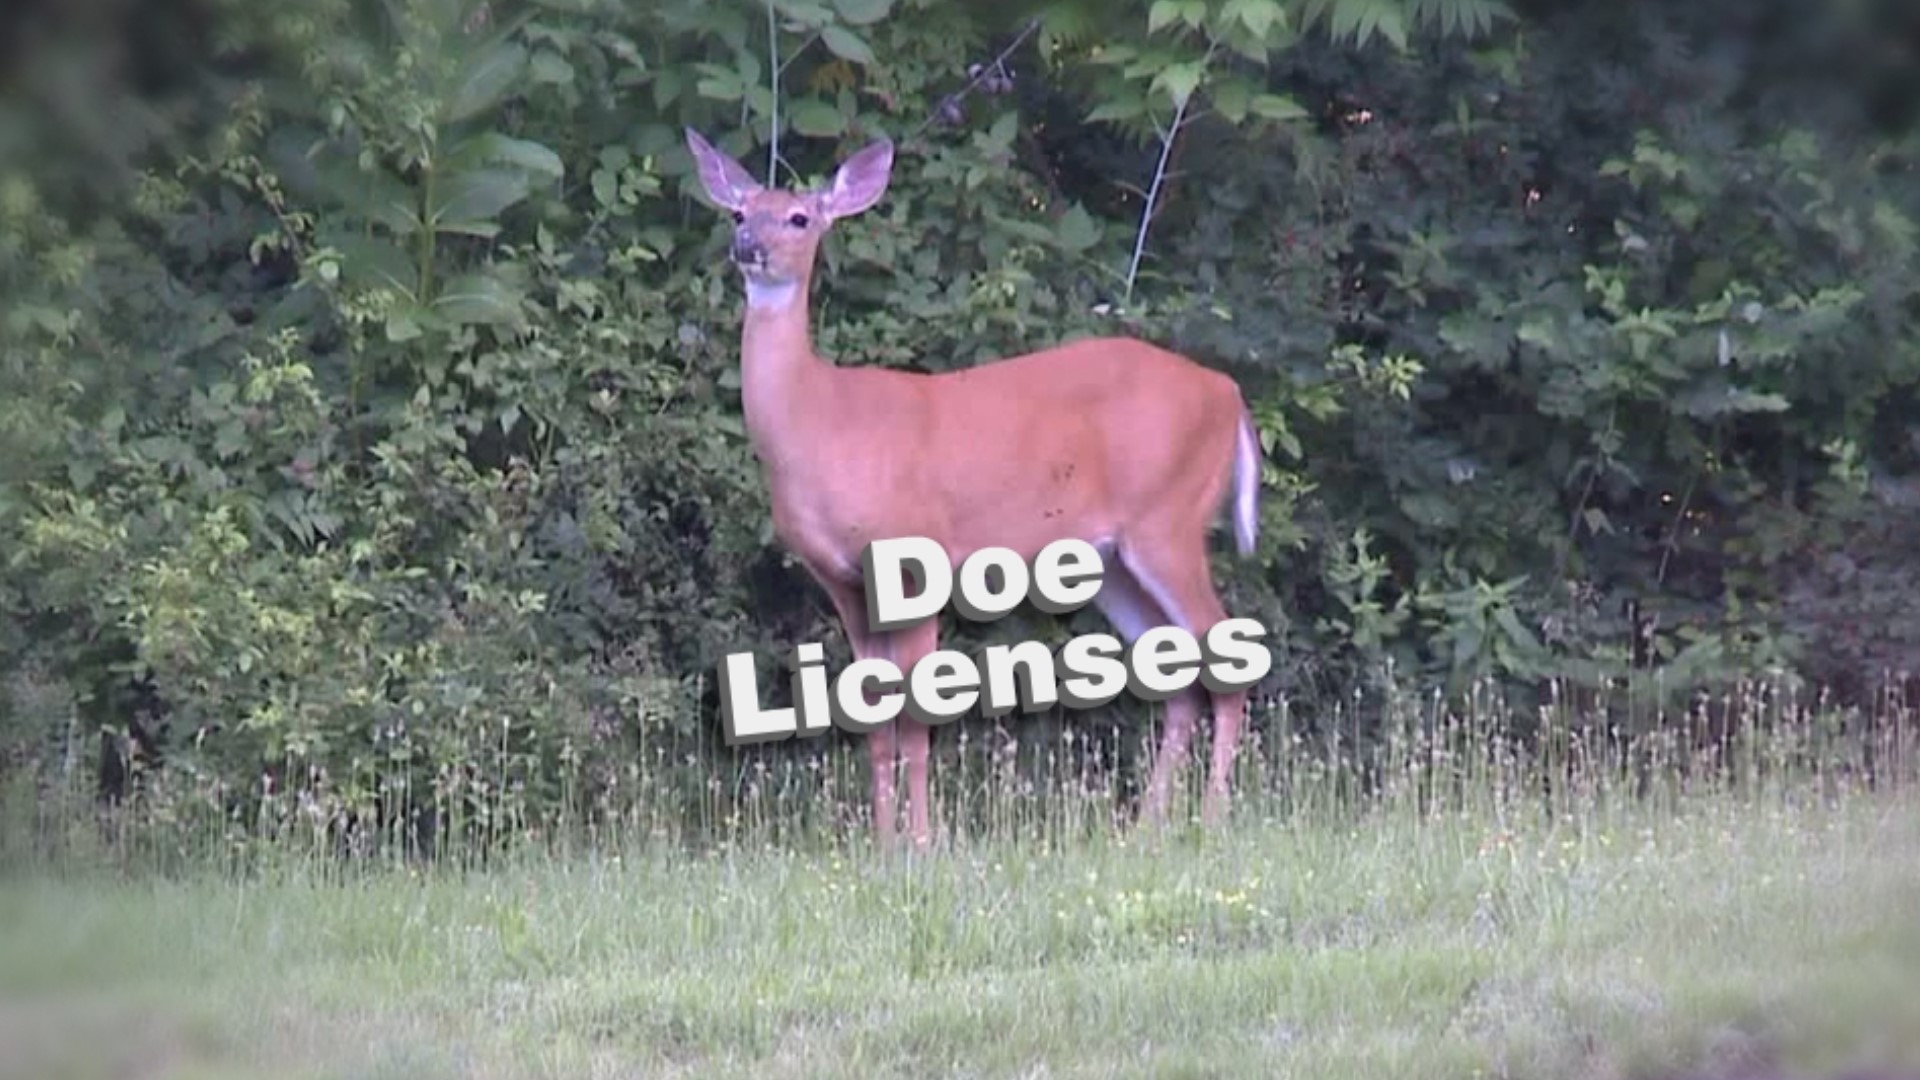 A bill allowing hunters to apply for doe licenses online passed the Pennsylvania House on Wednesday.